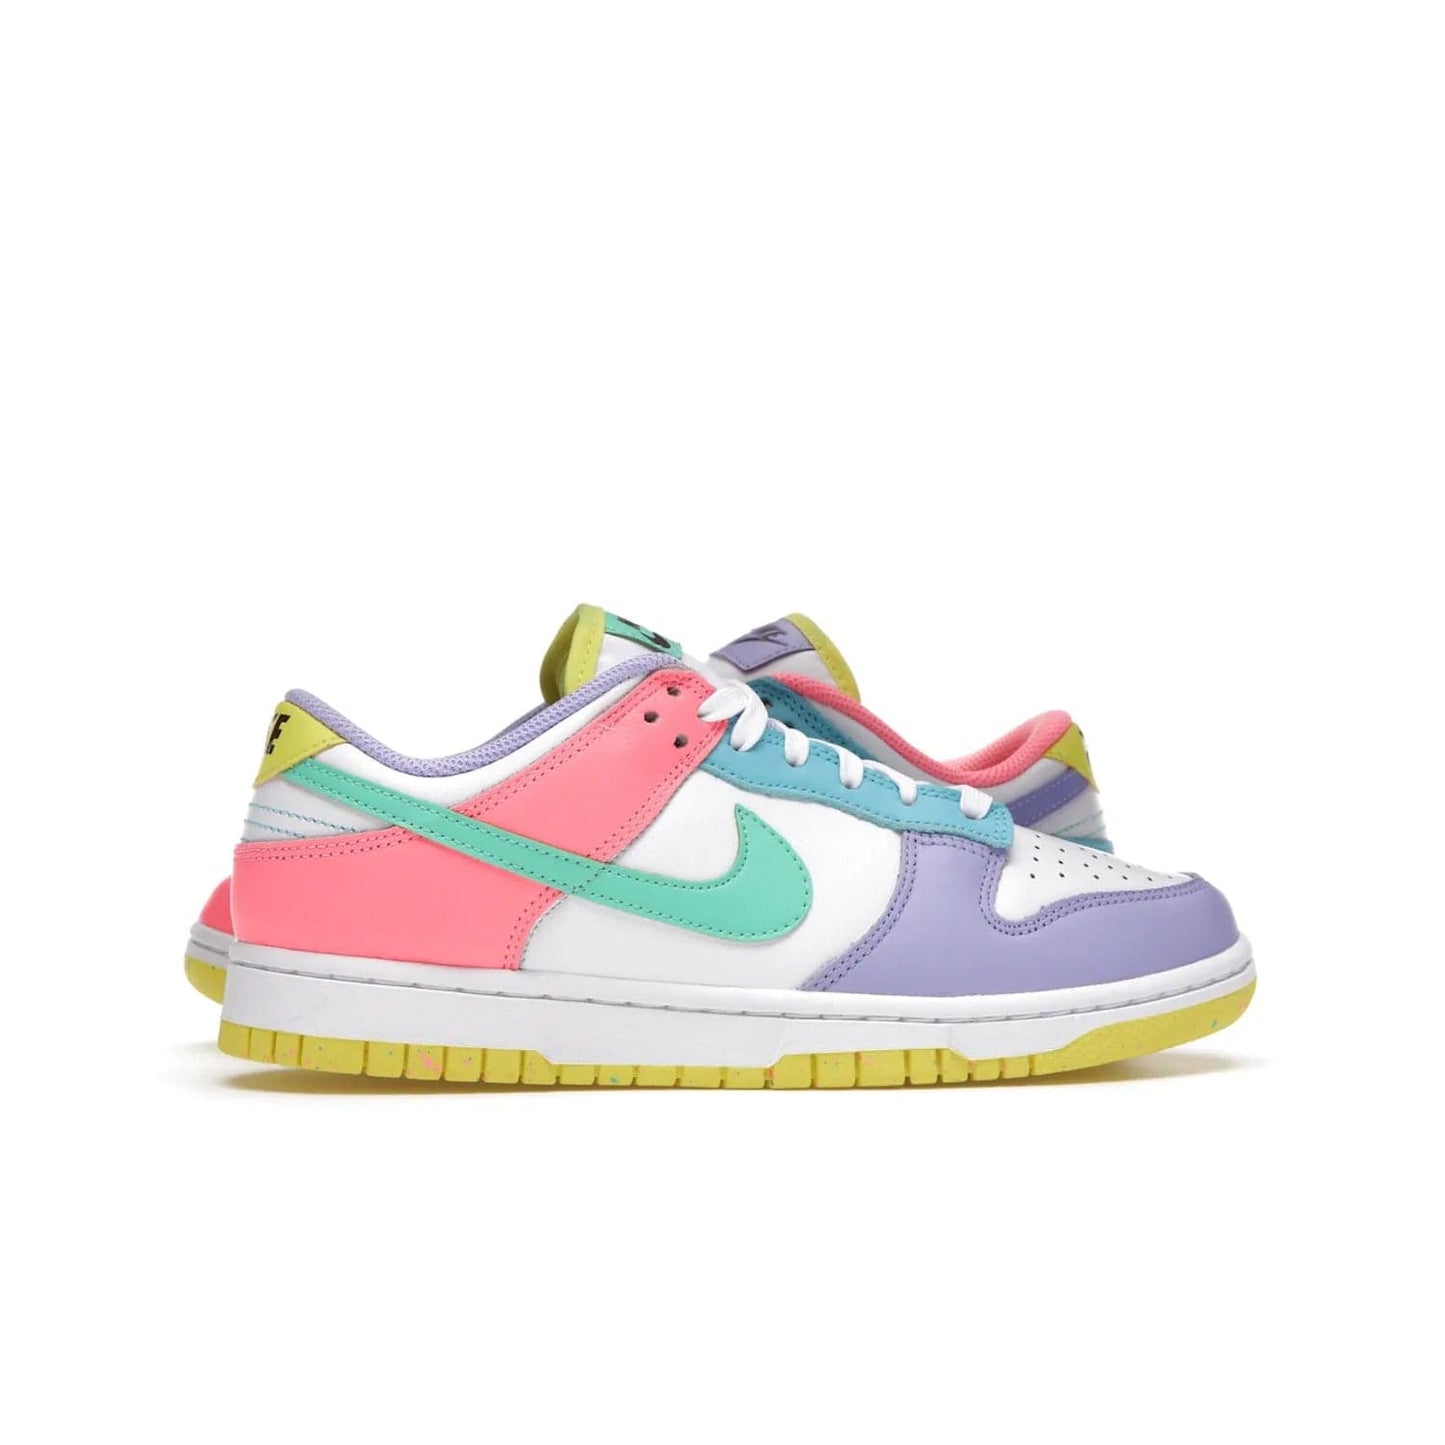 Nike Dunk Low SE Easter Candy (Women's) - Image 36 - Only at www.BallersClubKickz.com - UP
The Nike Dunk Low SE Easter Candy (Women's) brings a stylish touch to any outfit with its white leather upper, colorful accents, and multicolor speckle detailing. Shop now before they're gone.